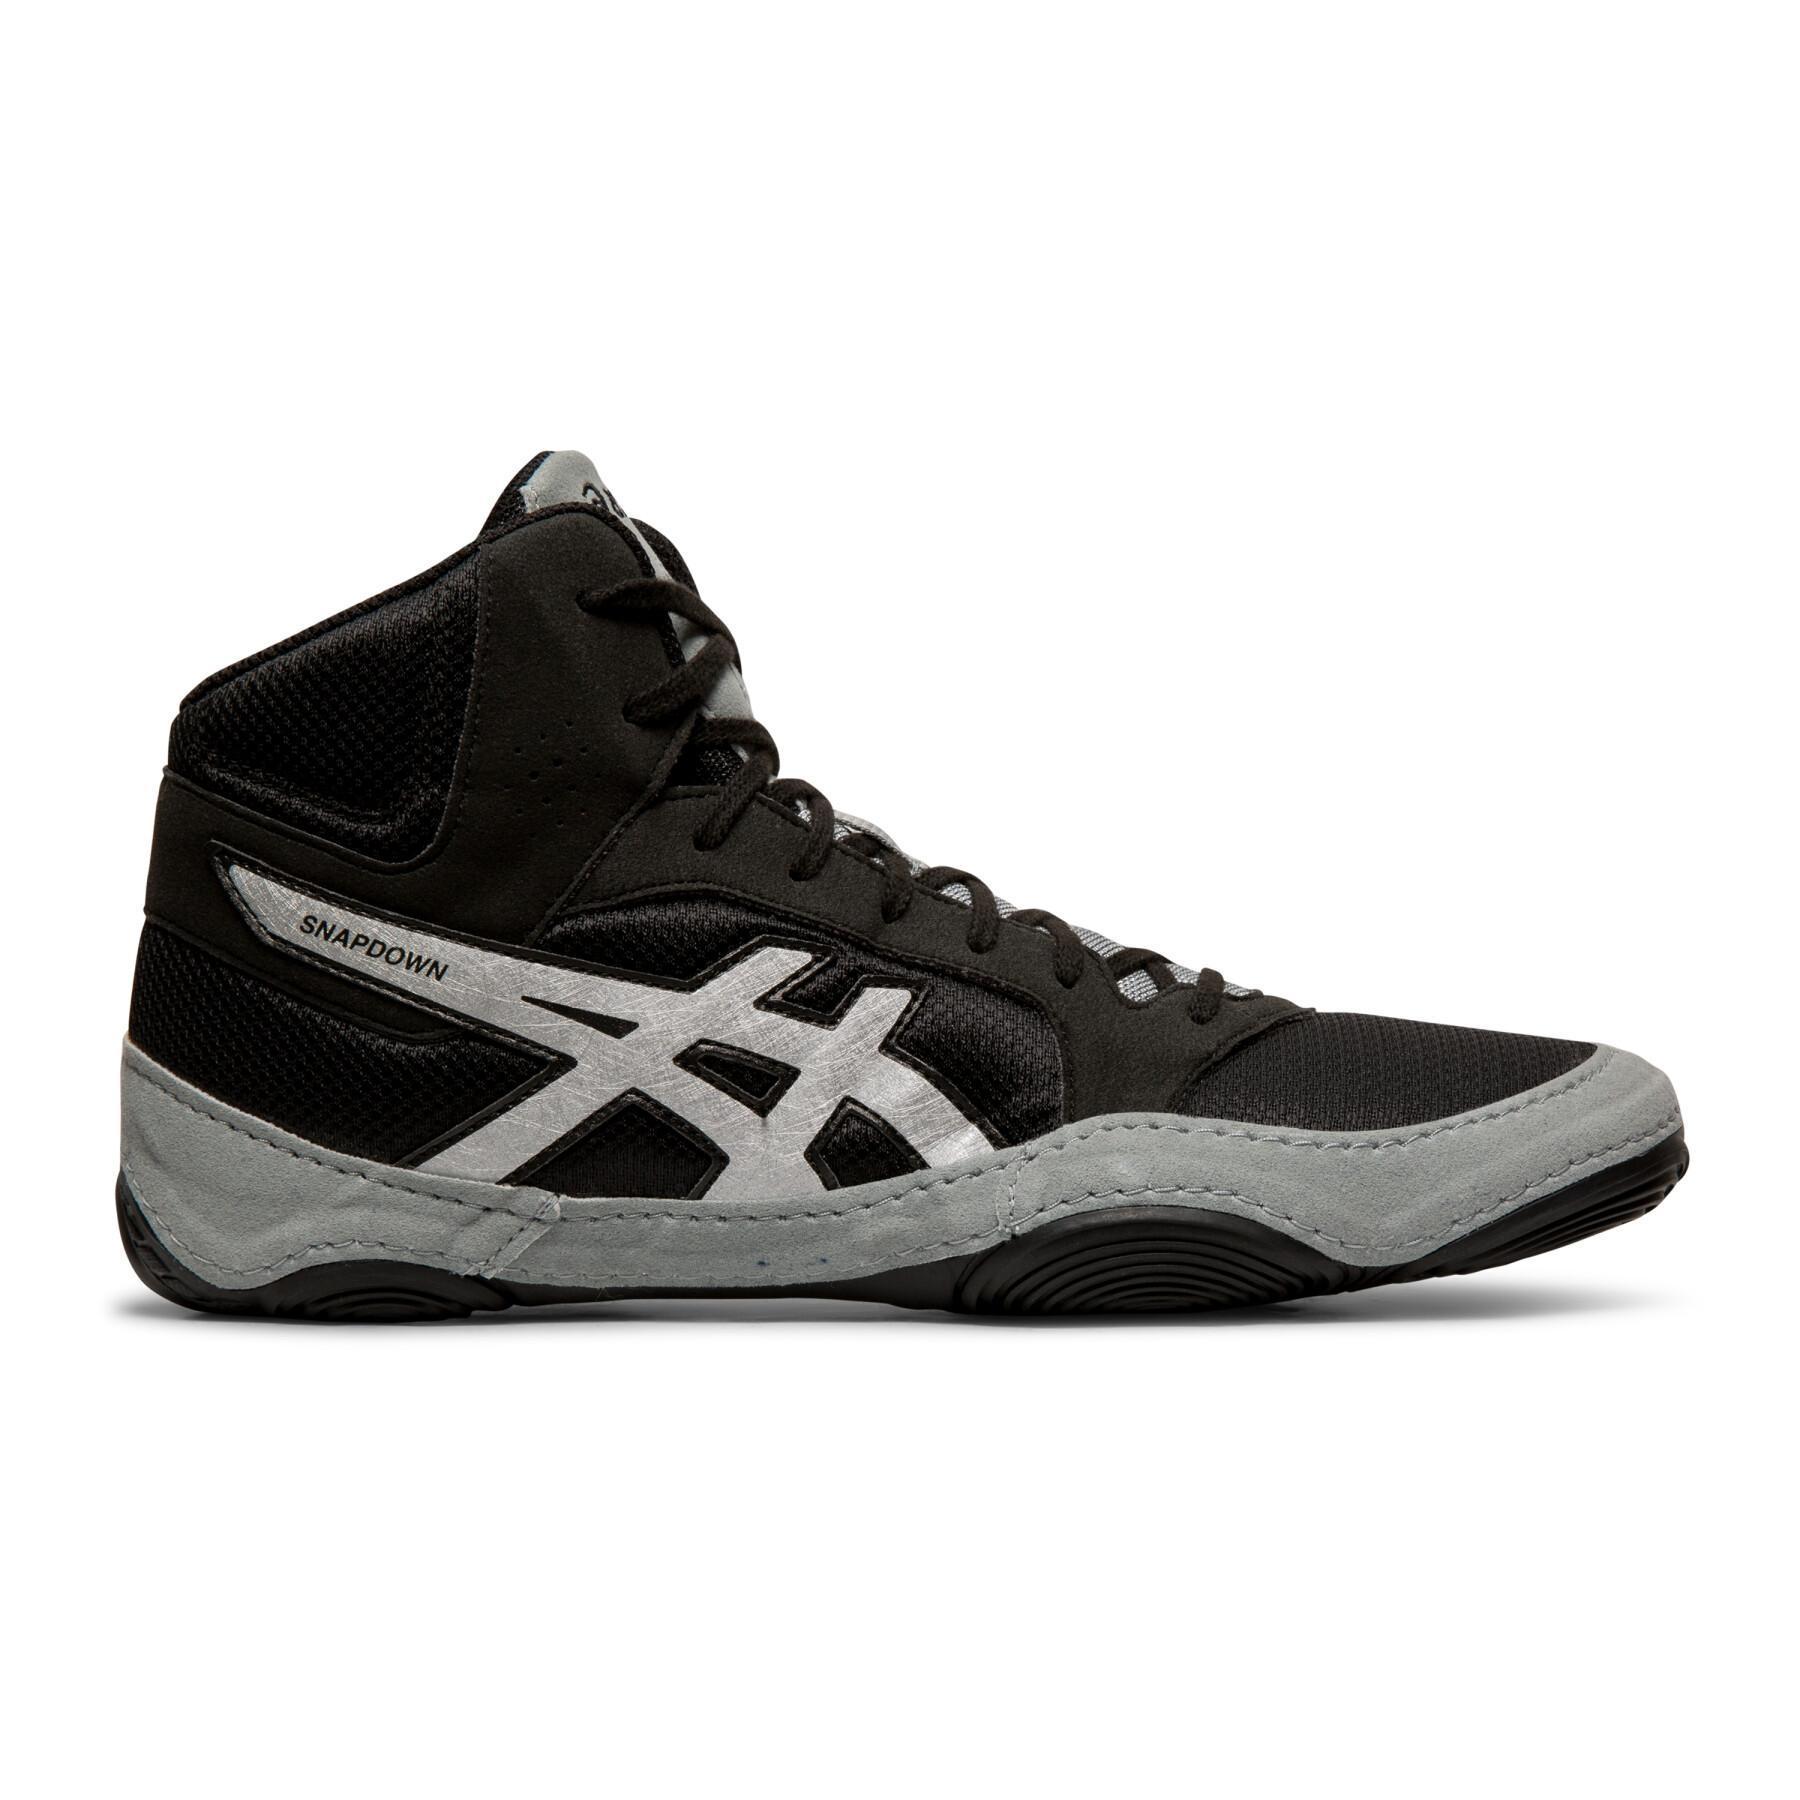 Shoes Asics snapdown ii